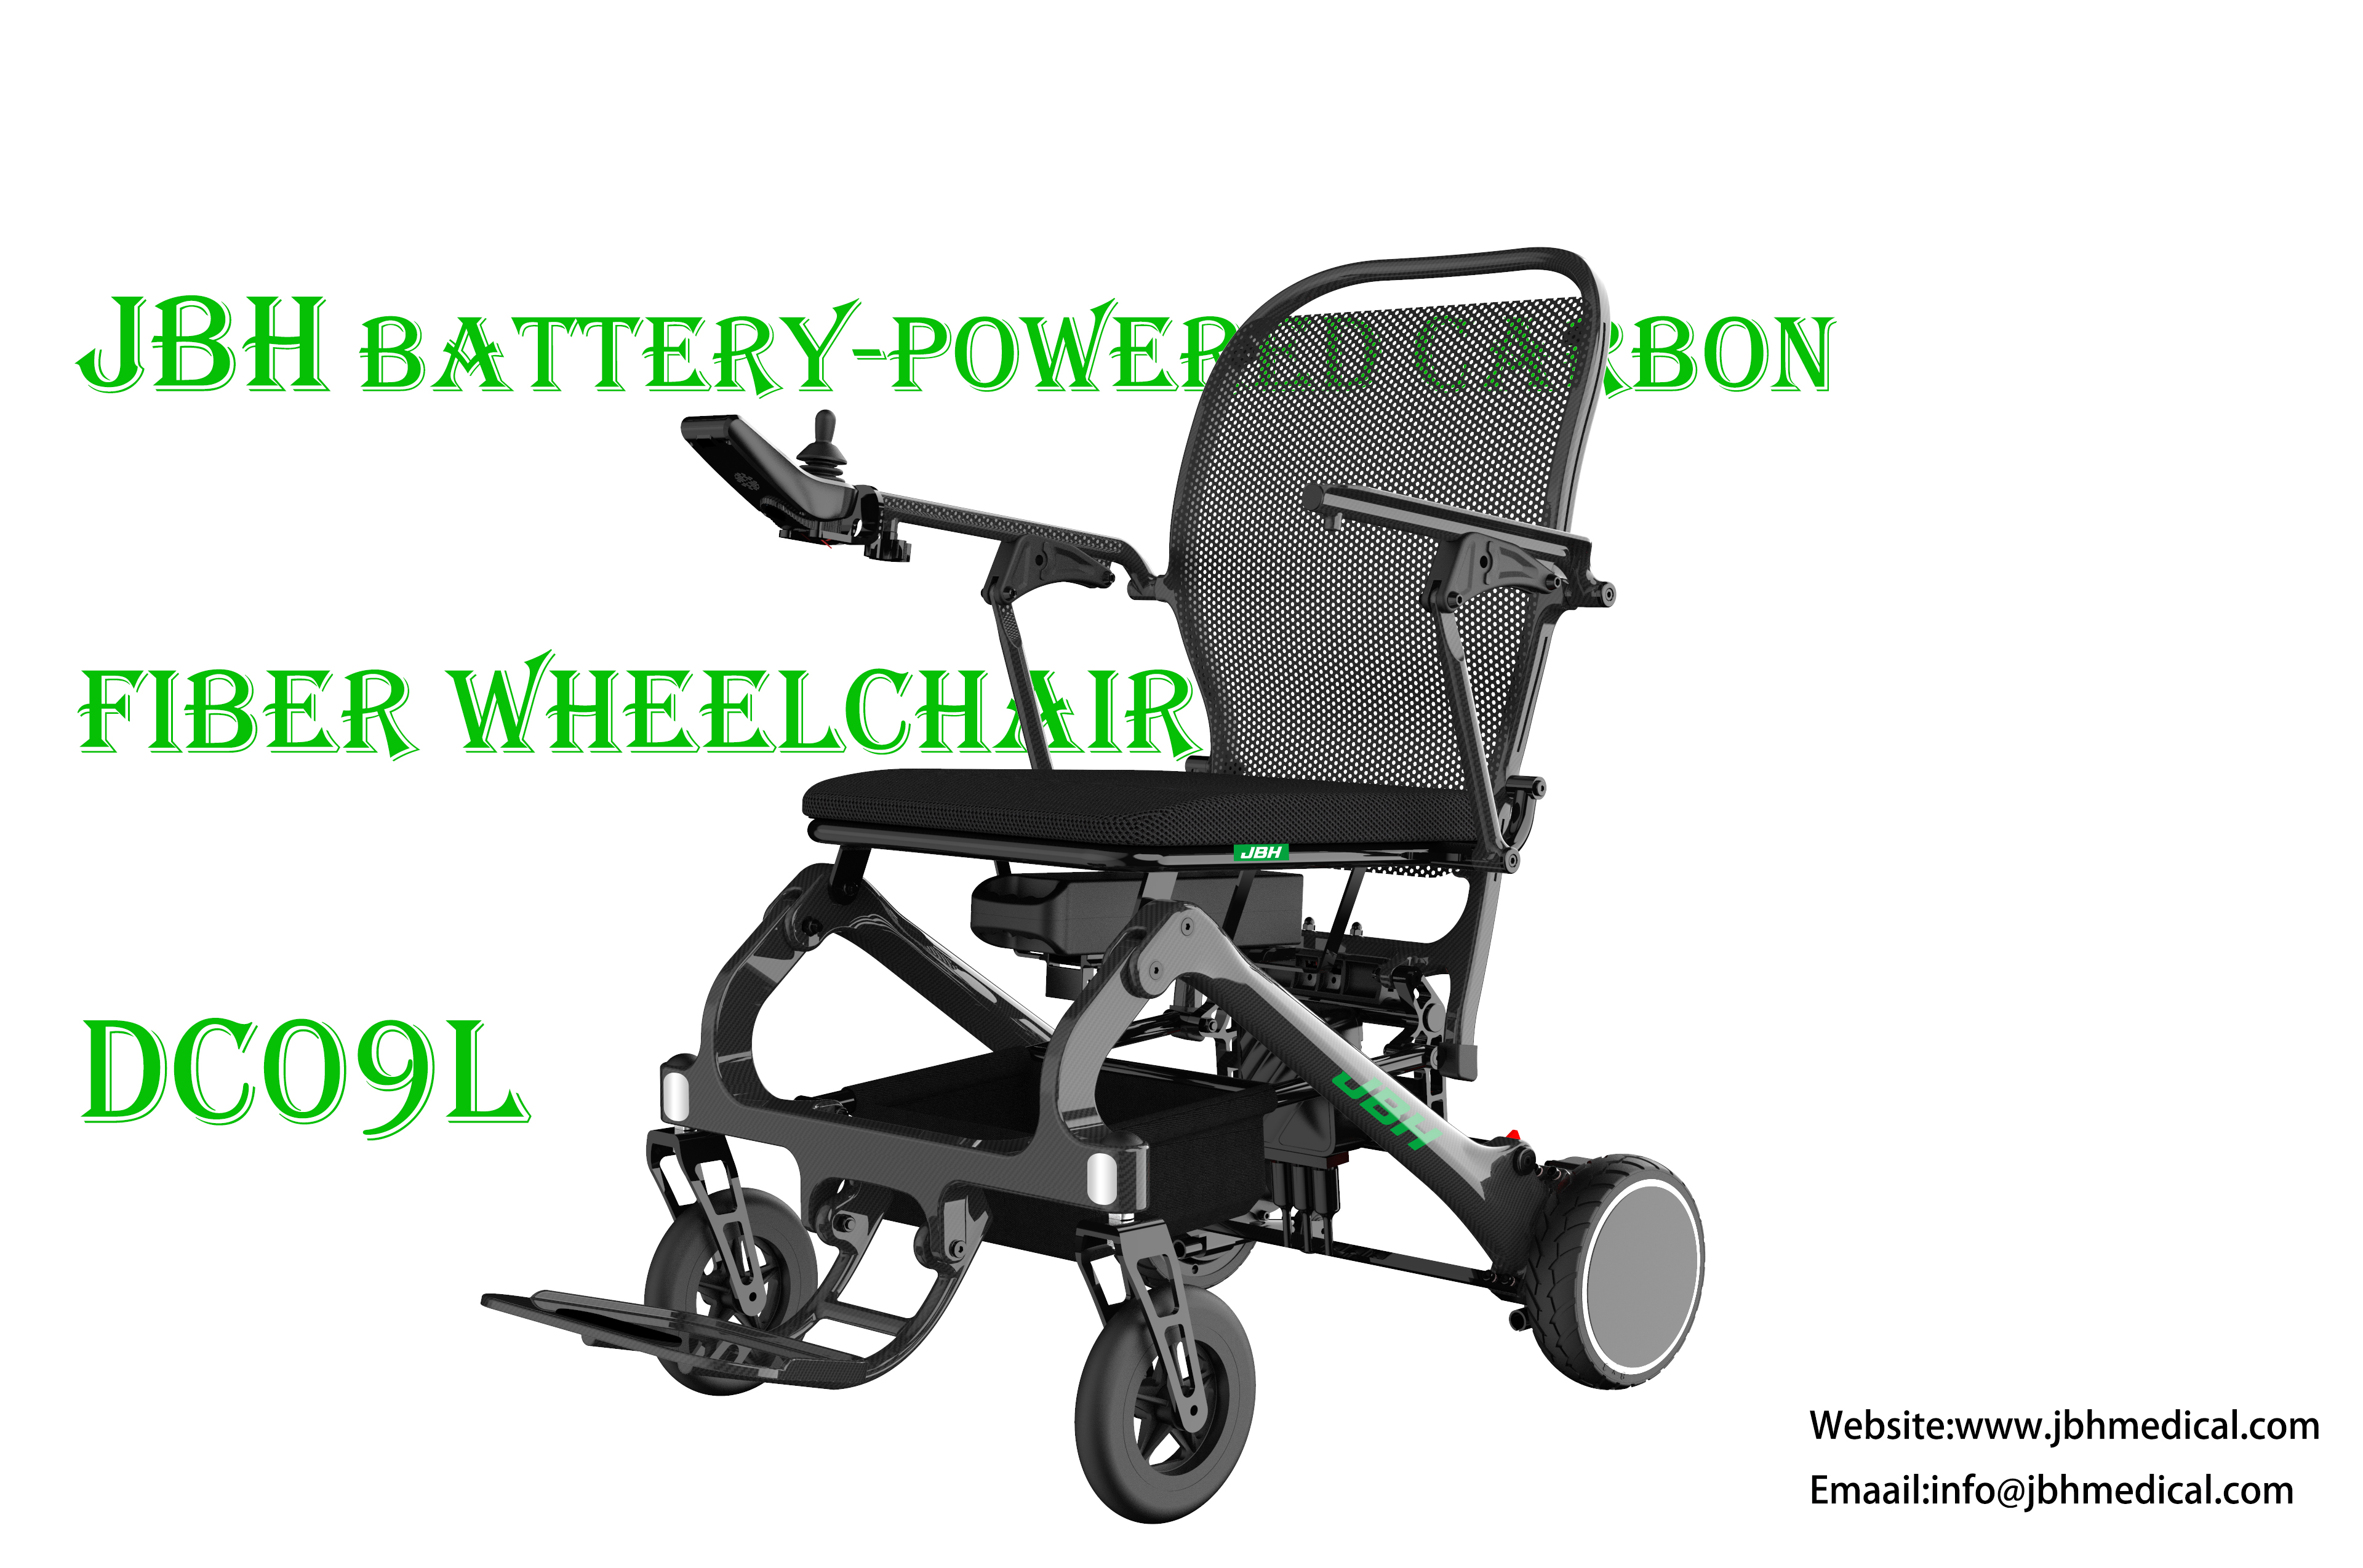 Should I Get A N Electric Wheelchair Or A Mobility Scooter?